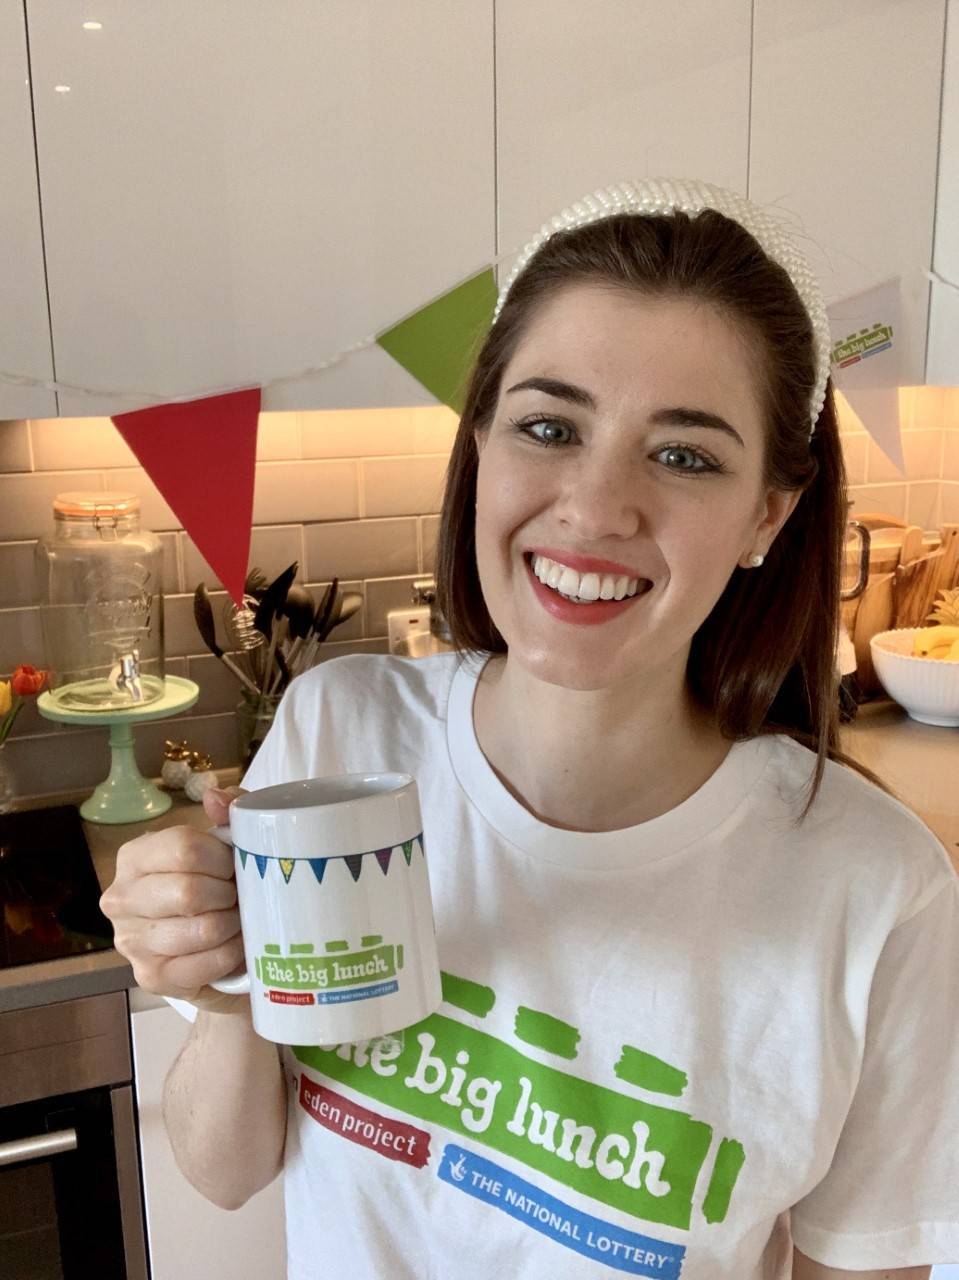 Alice Fevronia smiling in the kitchen wearing a Big Lunch t-shirt and holding a big lunch mug